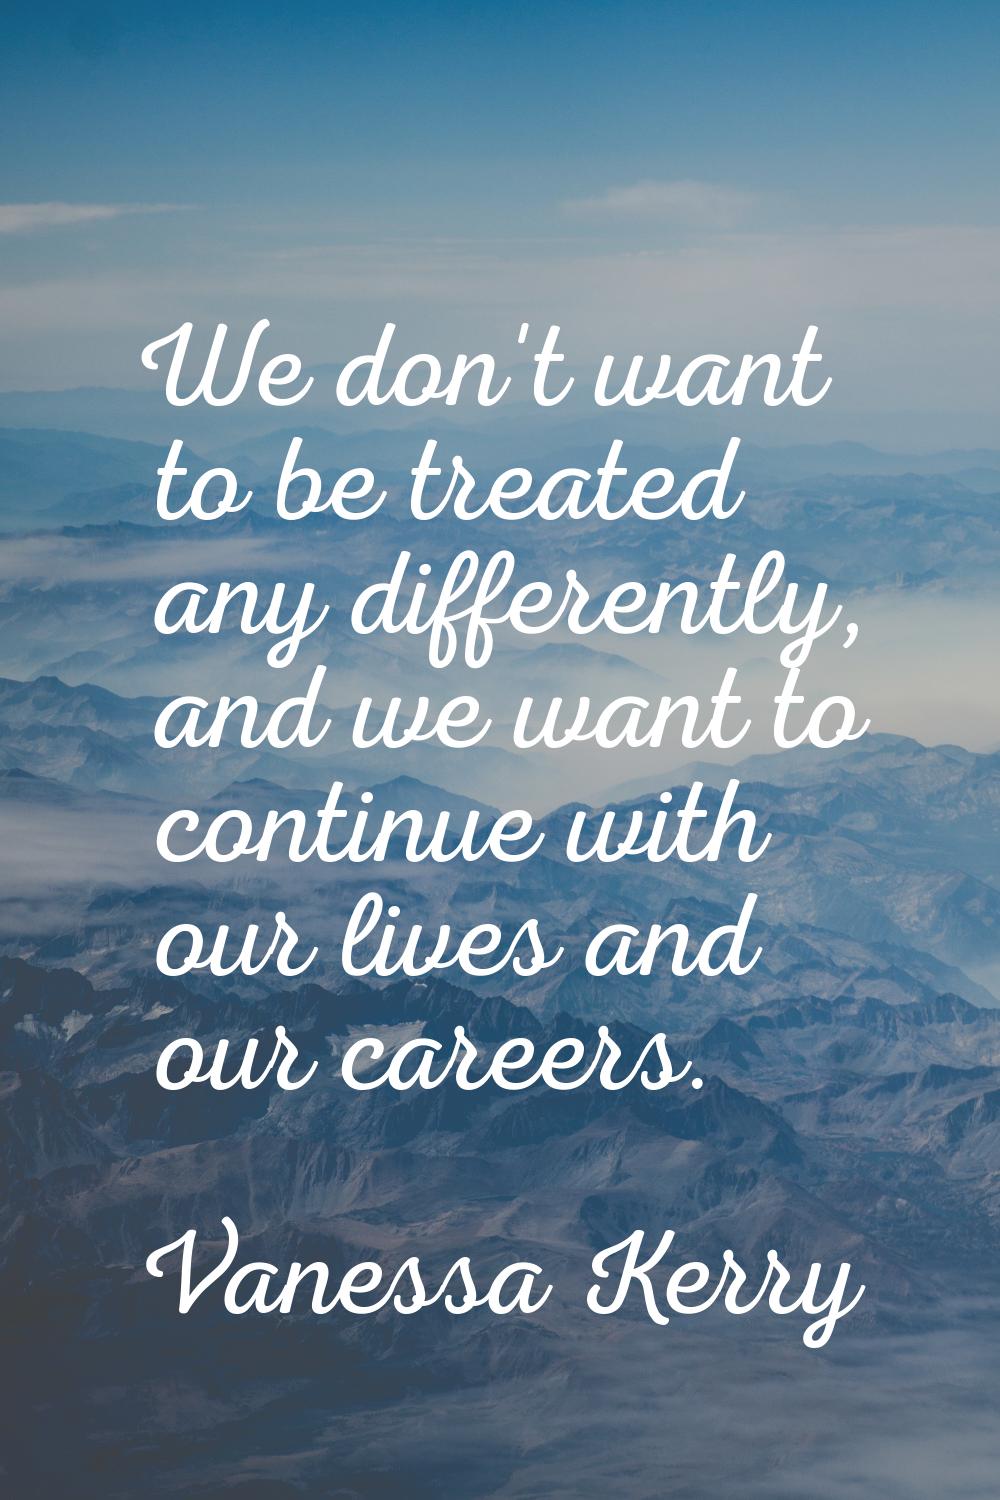 We don't want to be treated any differently, and we want to continue with our lives and our careers